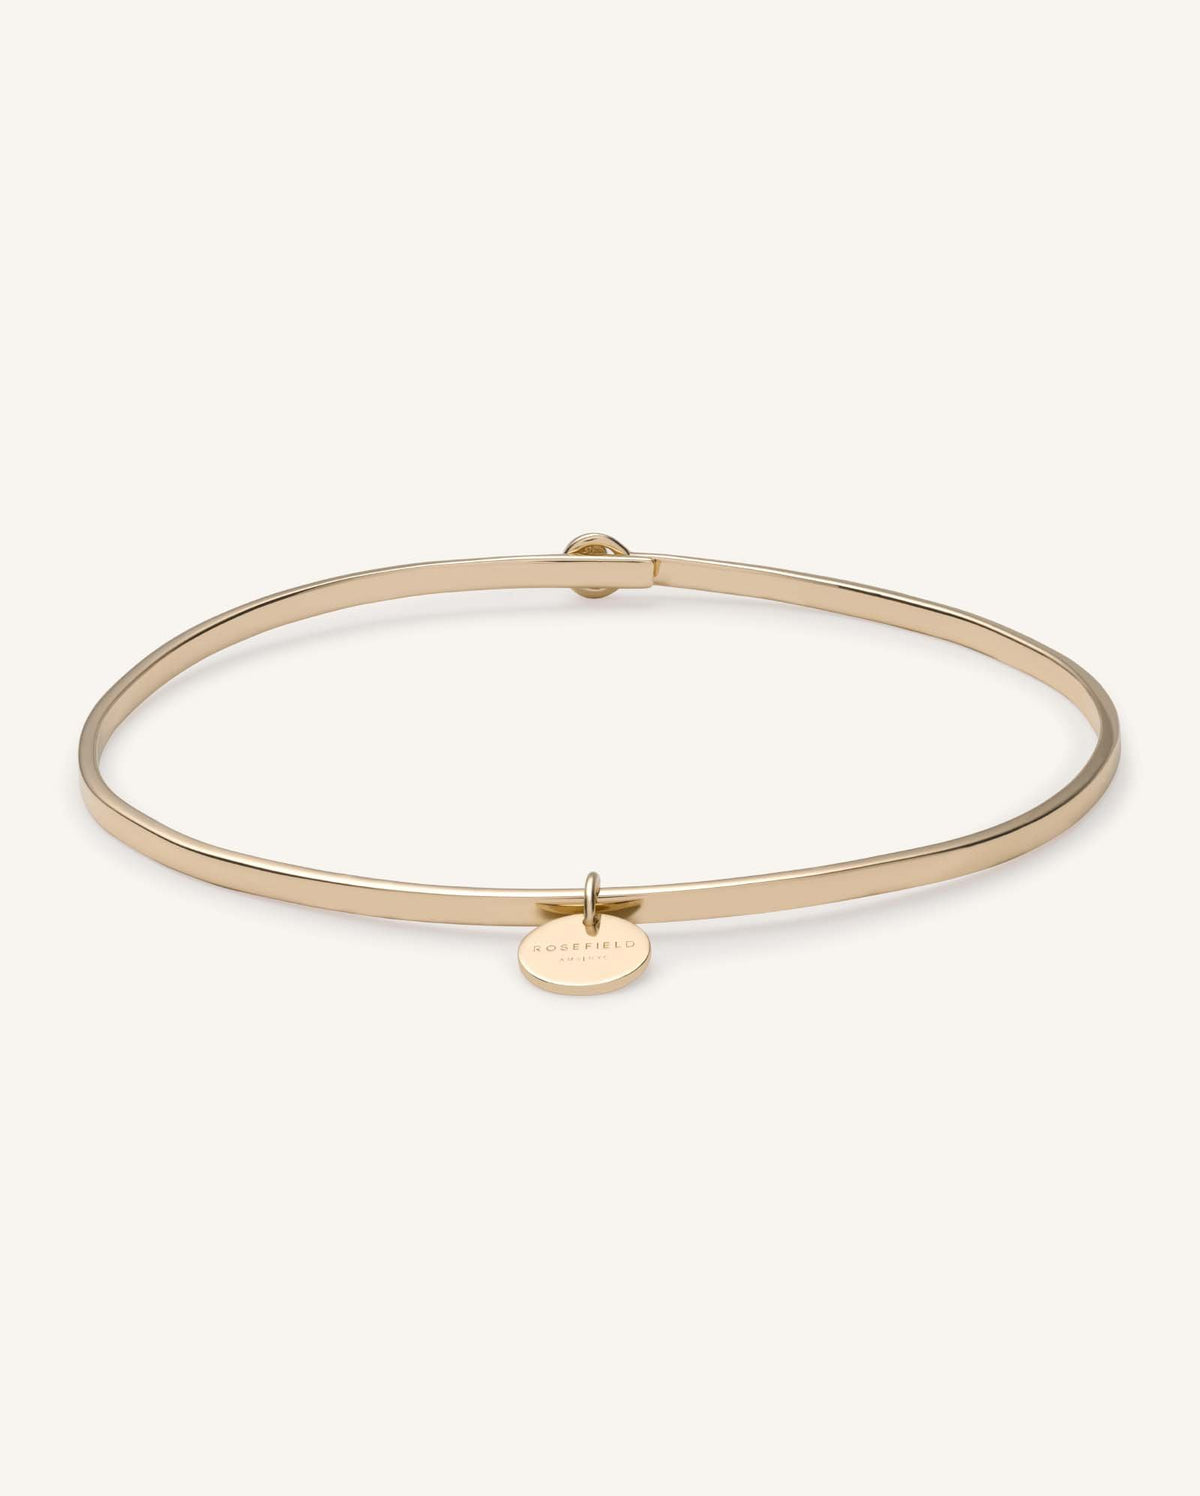 jewelry bracelet The Downtown Chic Rosefield, leftcolumn